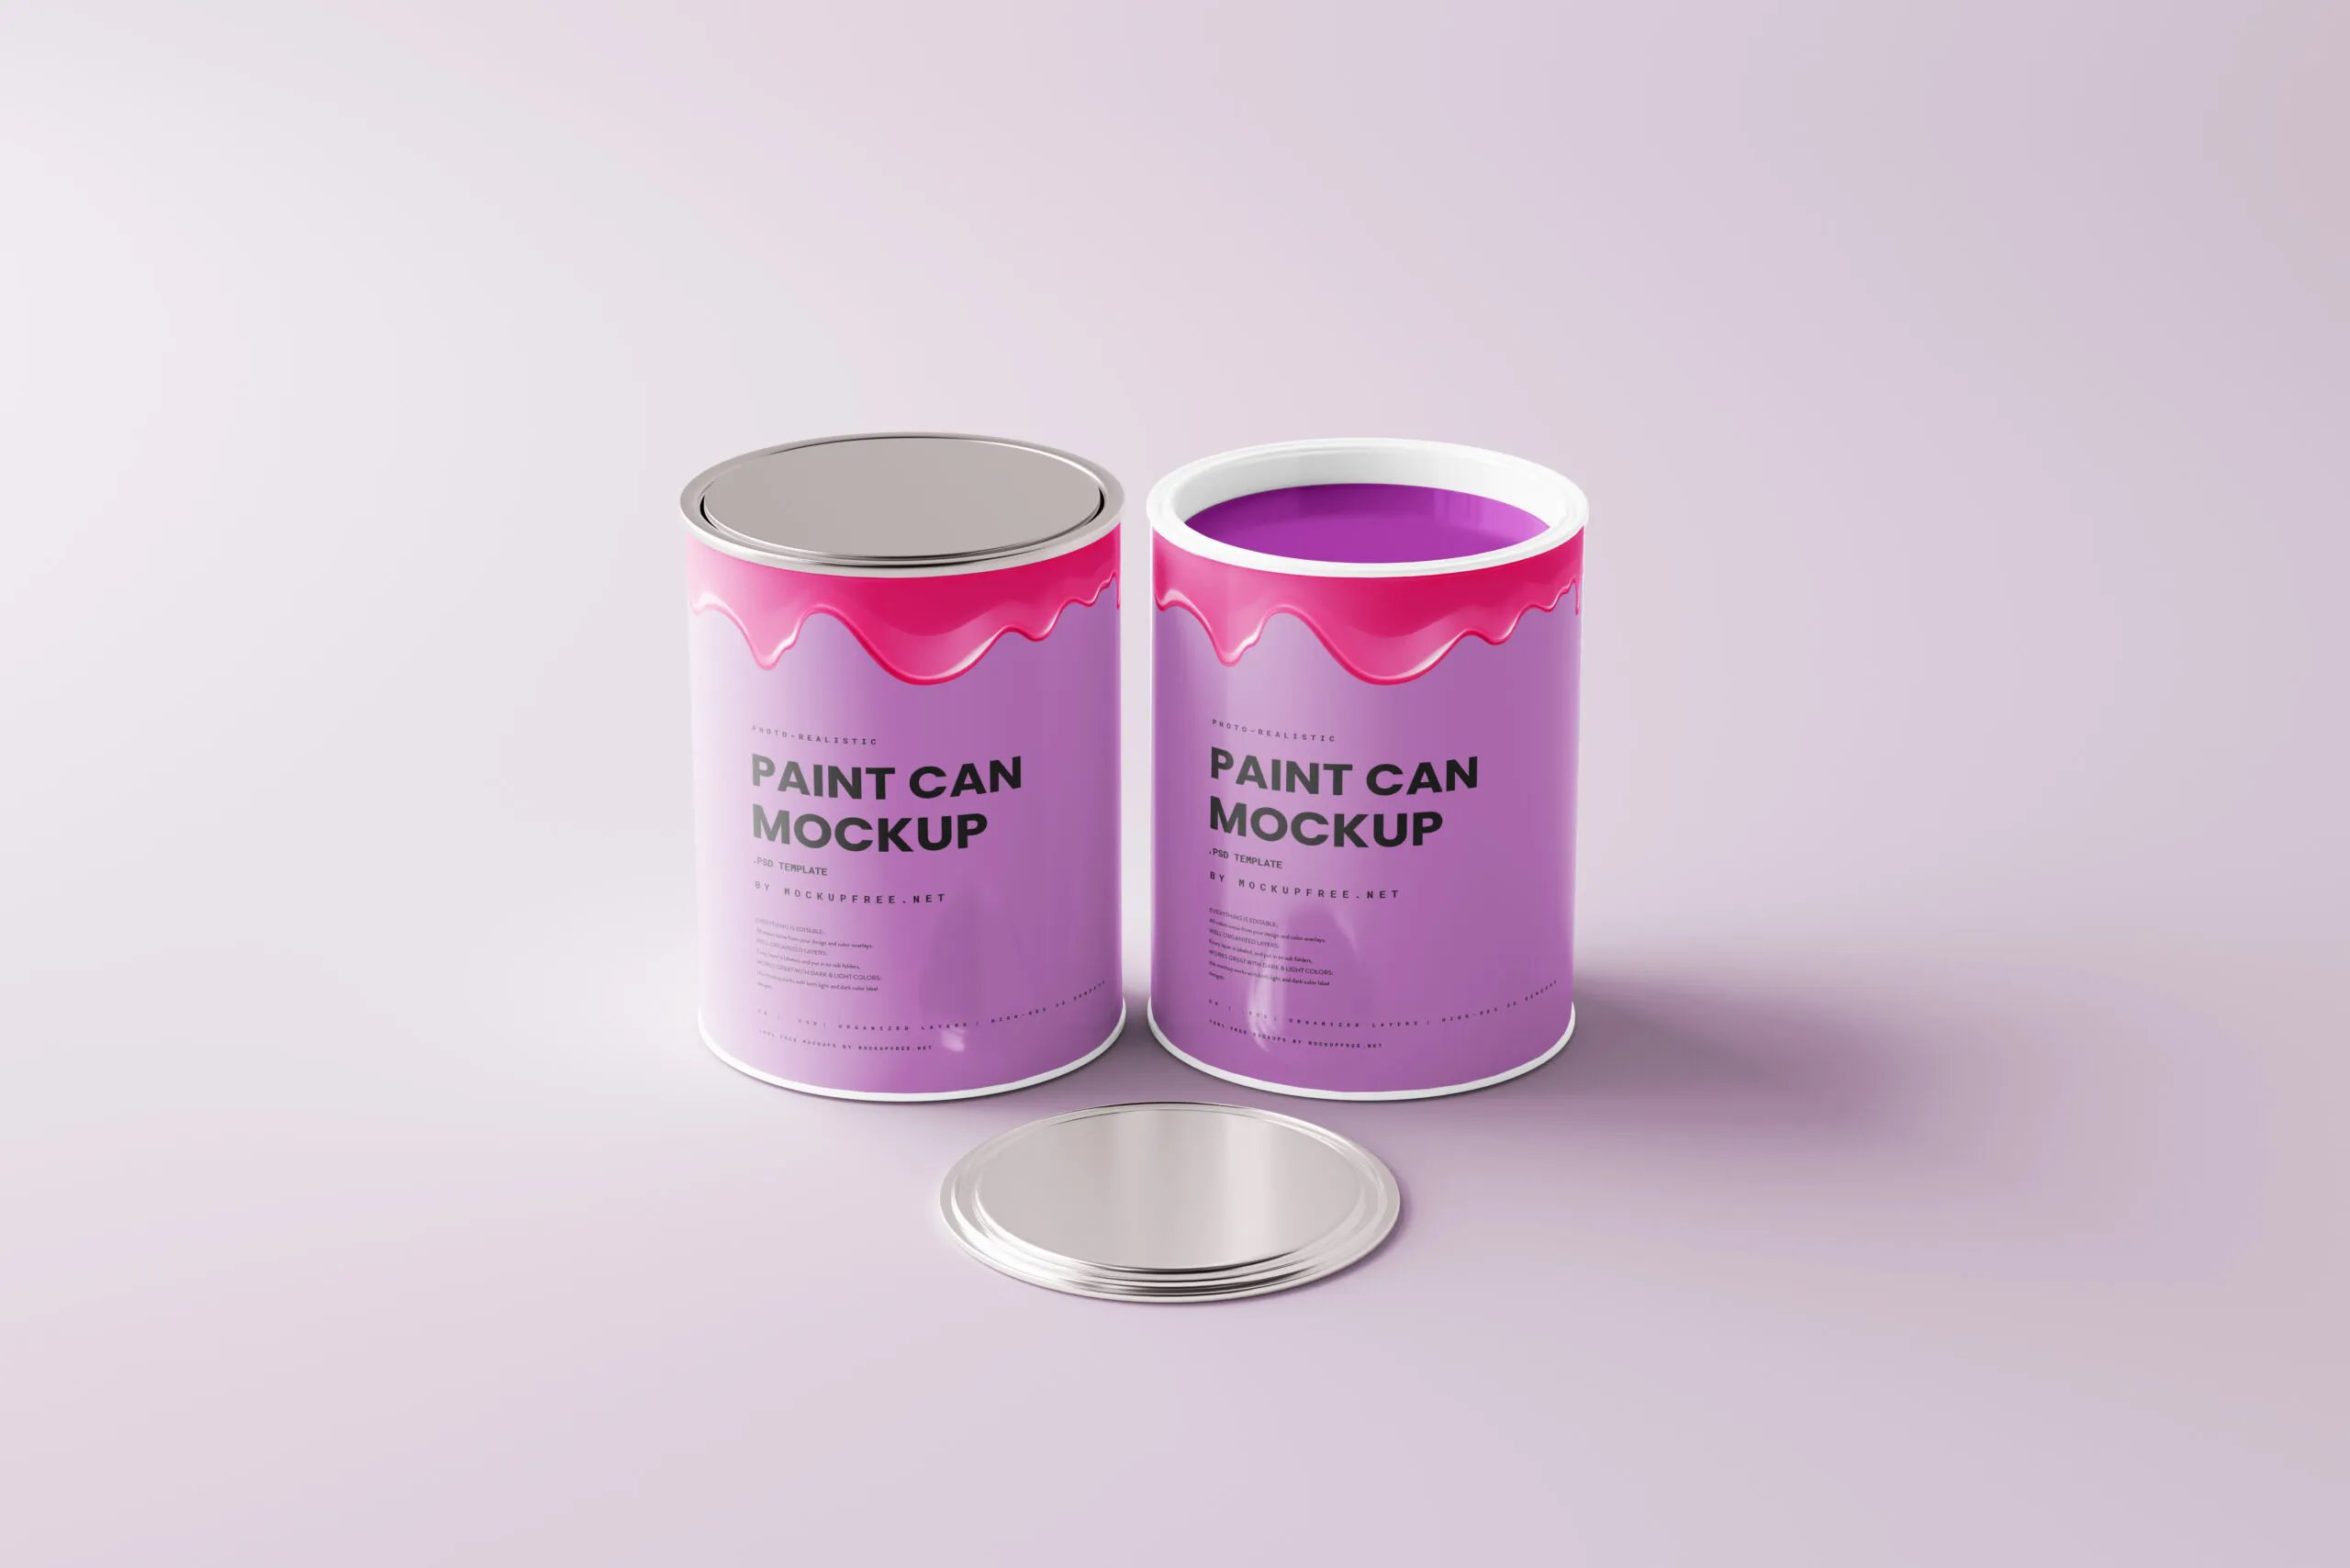 5 Mockups of Paint Can in Distinct Views FREE PSD